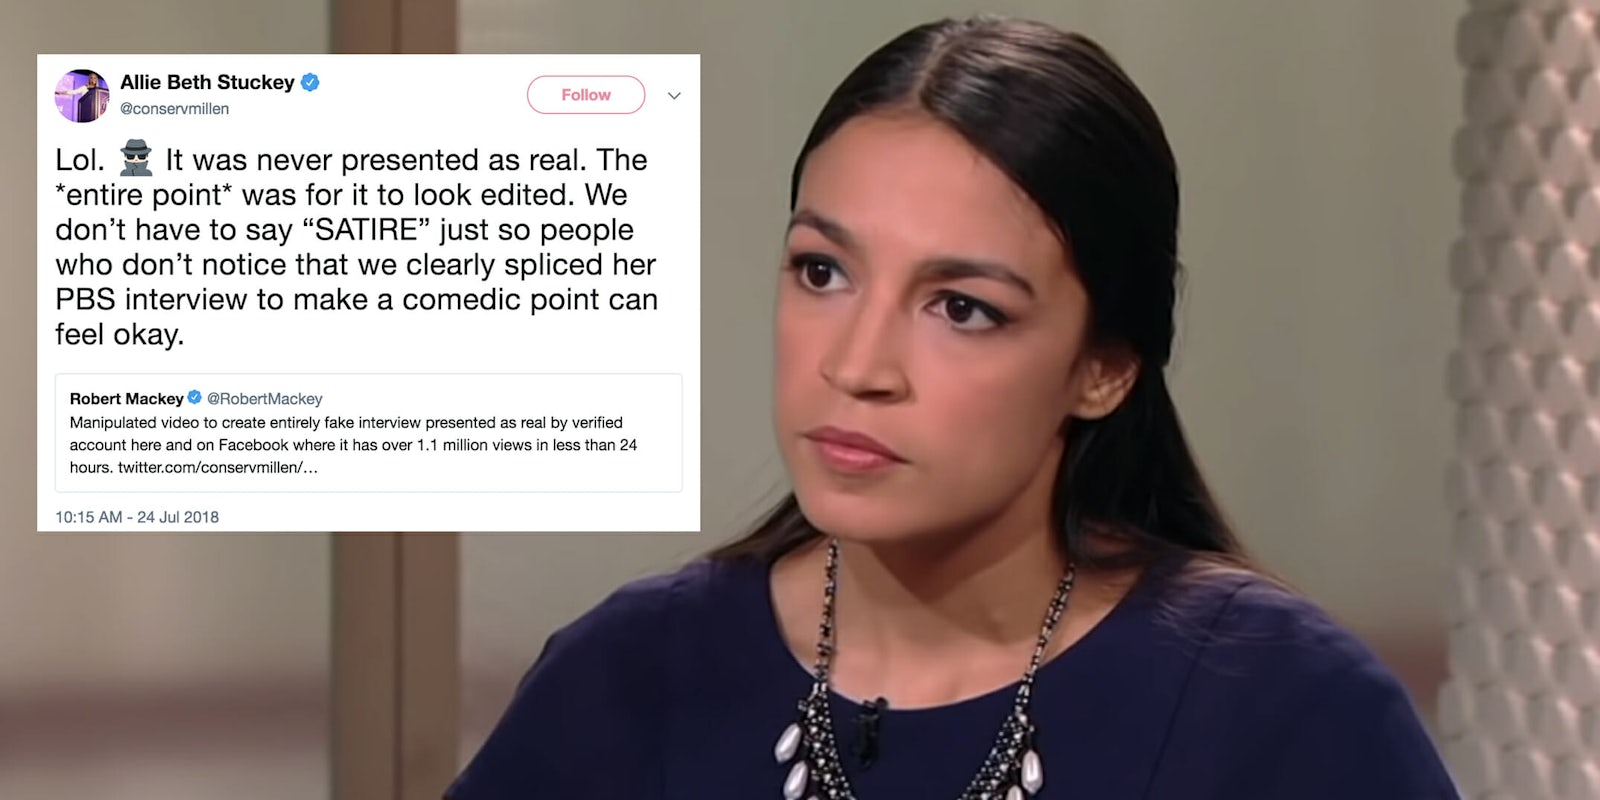 CRTV is defending a spliced Alexandria Ocasio-Cortez video as 'satire' even though some viewers thought it was real.